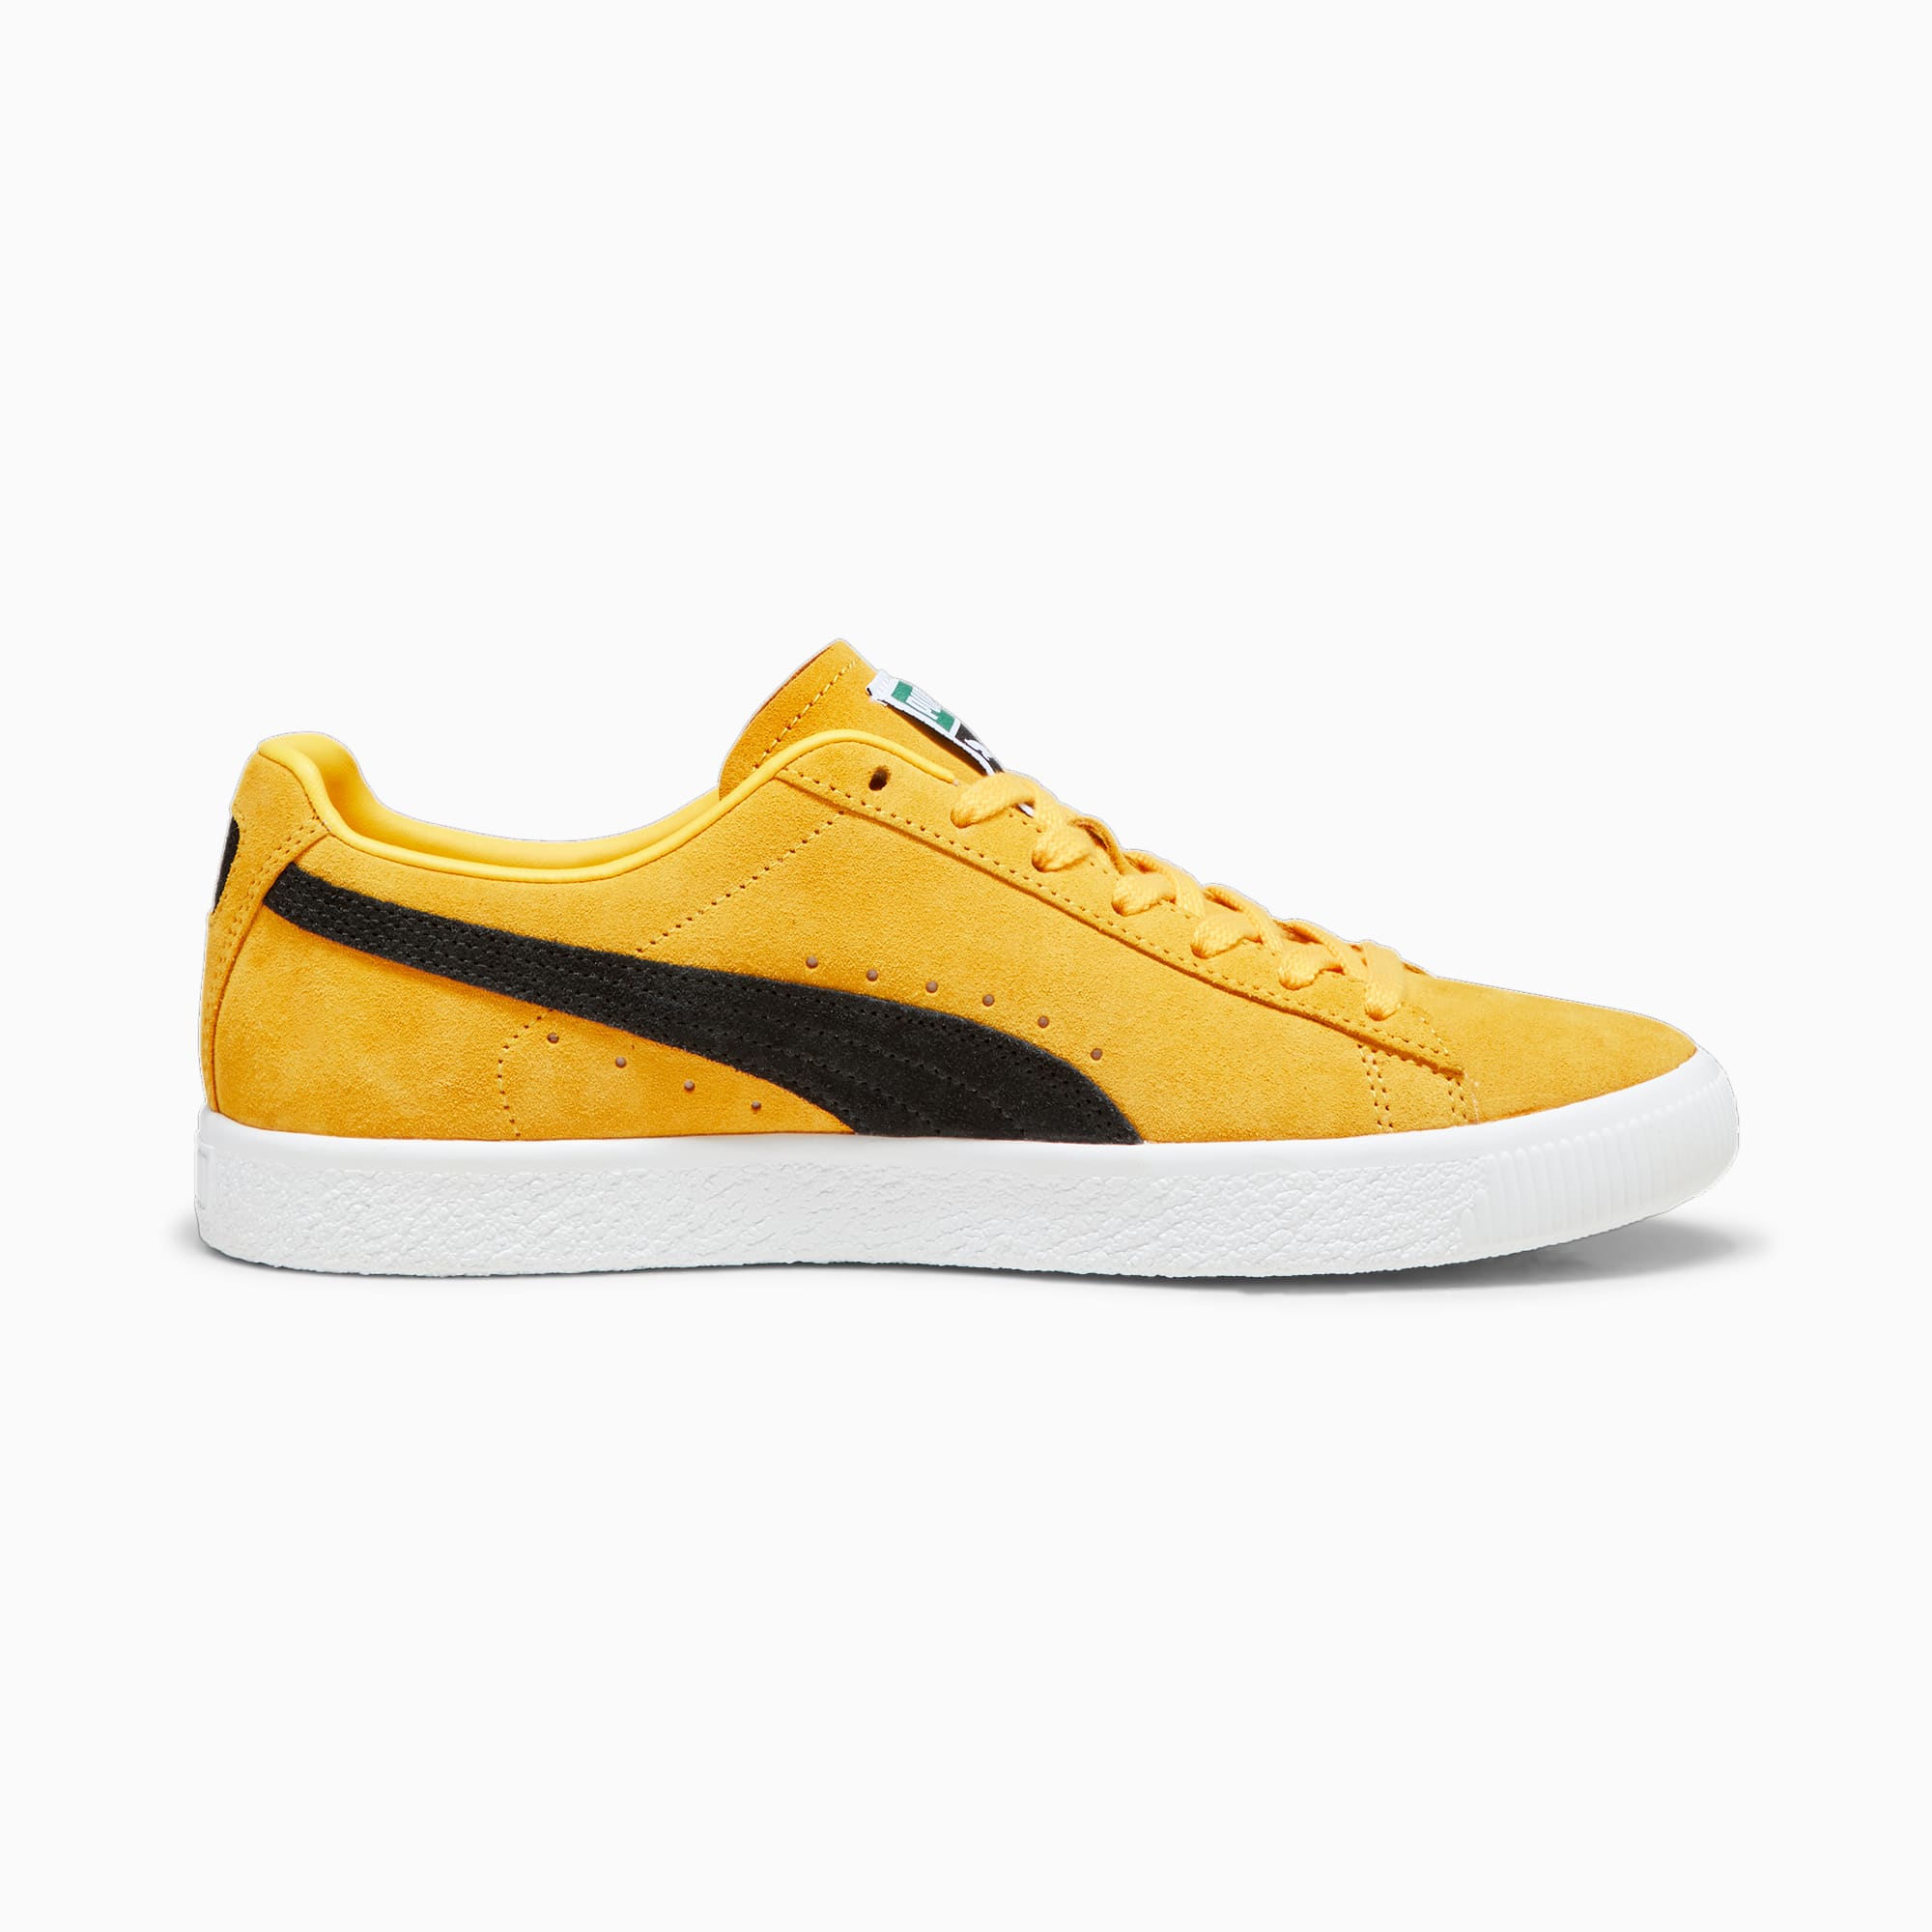 Women's PUMA Clyde OG Sneakers, Yellow Sizzle/Black, Size 35,5, Shoes